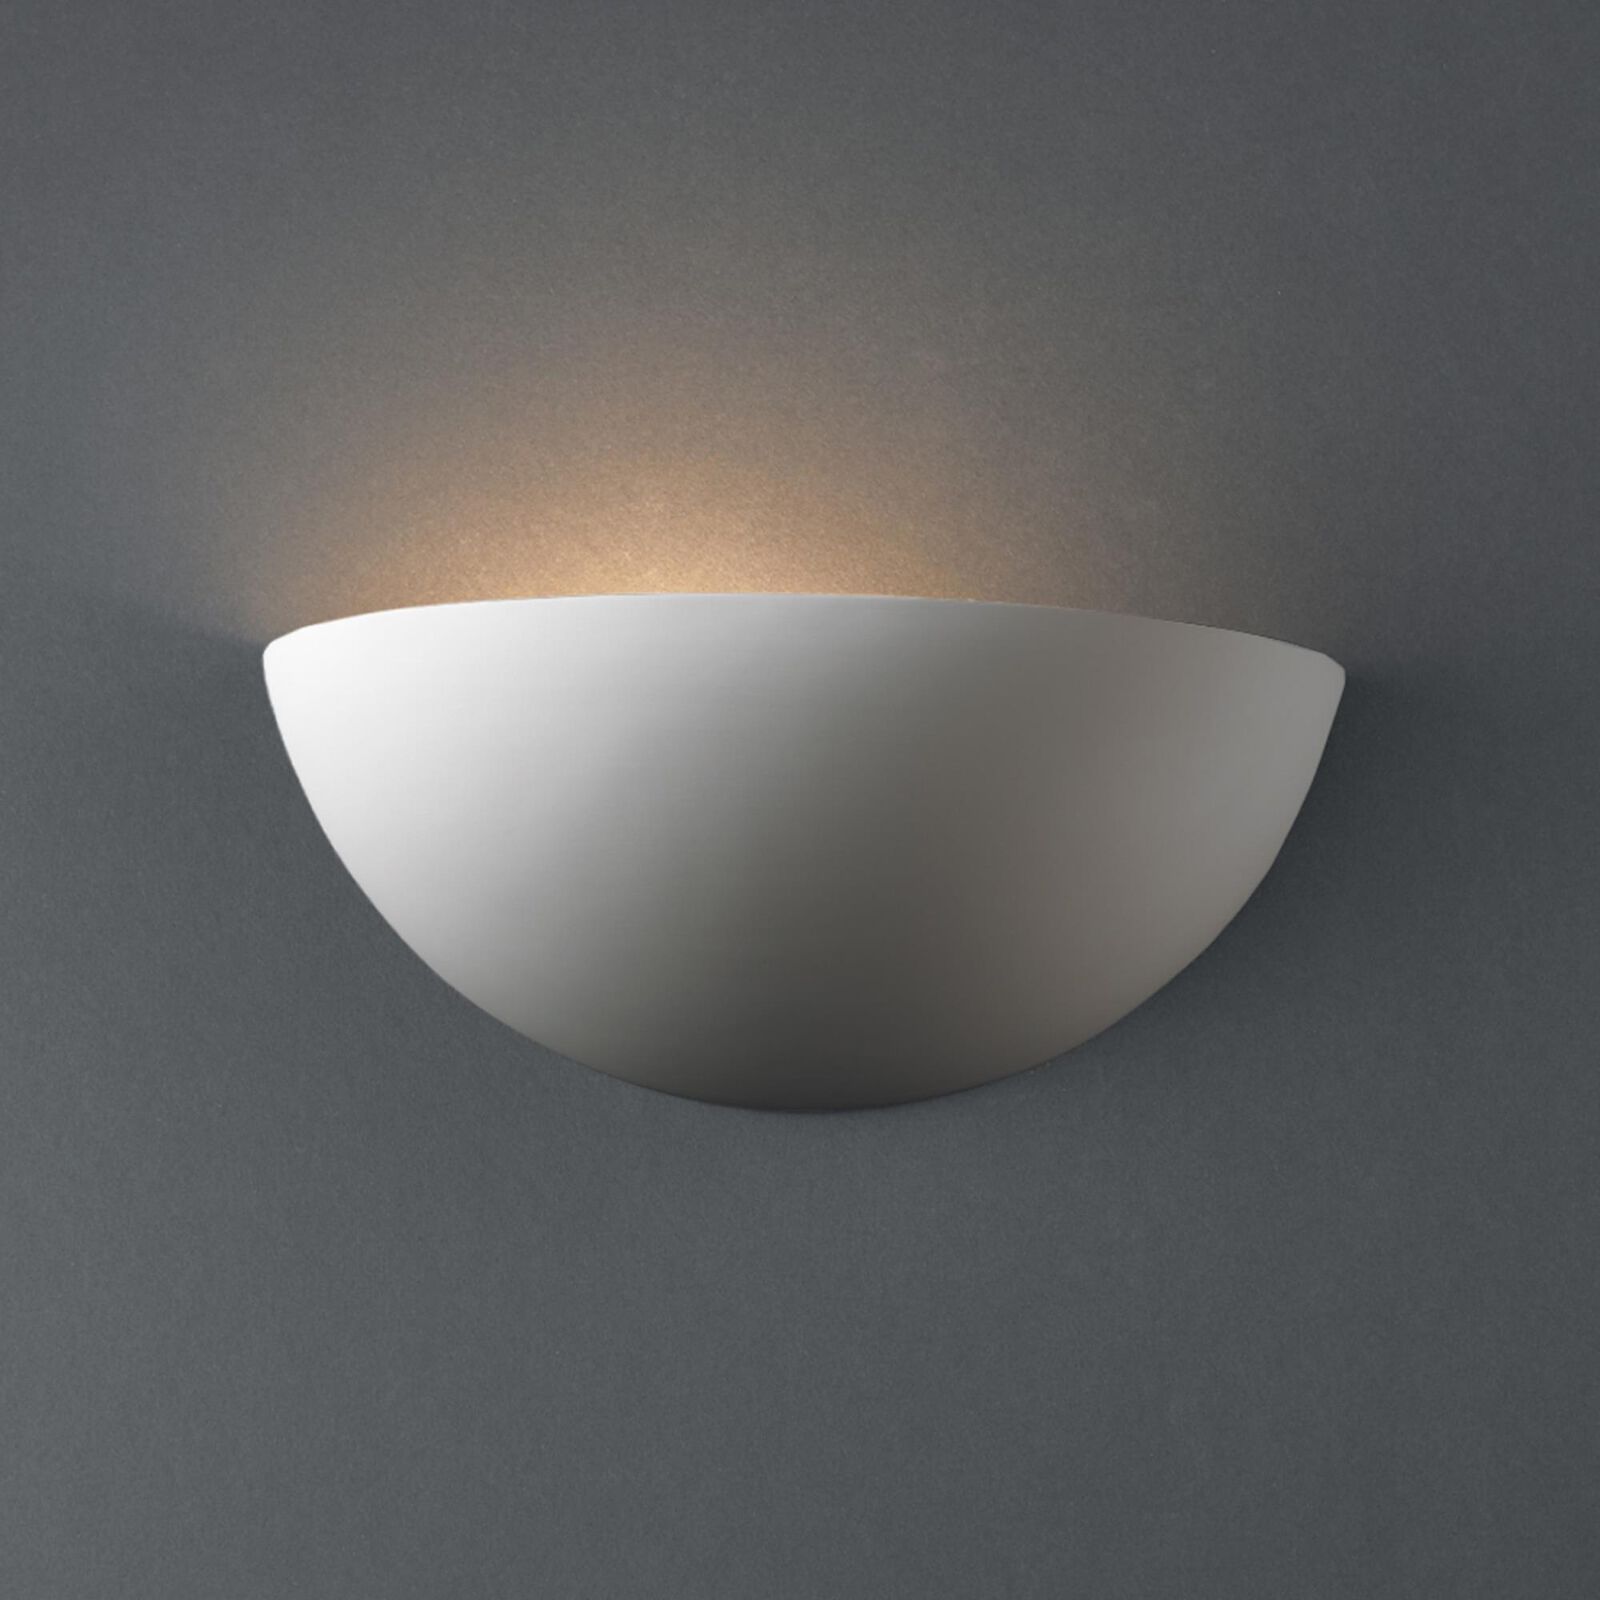 Ambiance 10 Inch Wall Sconce | Capitol Lighting